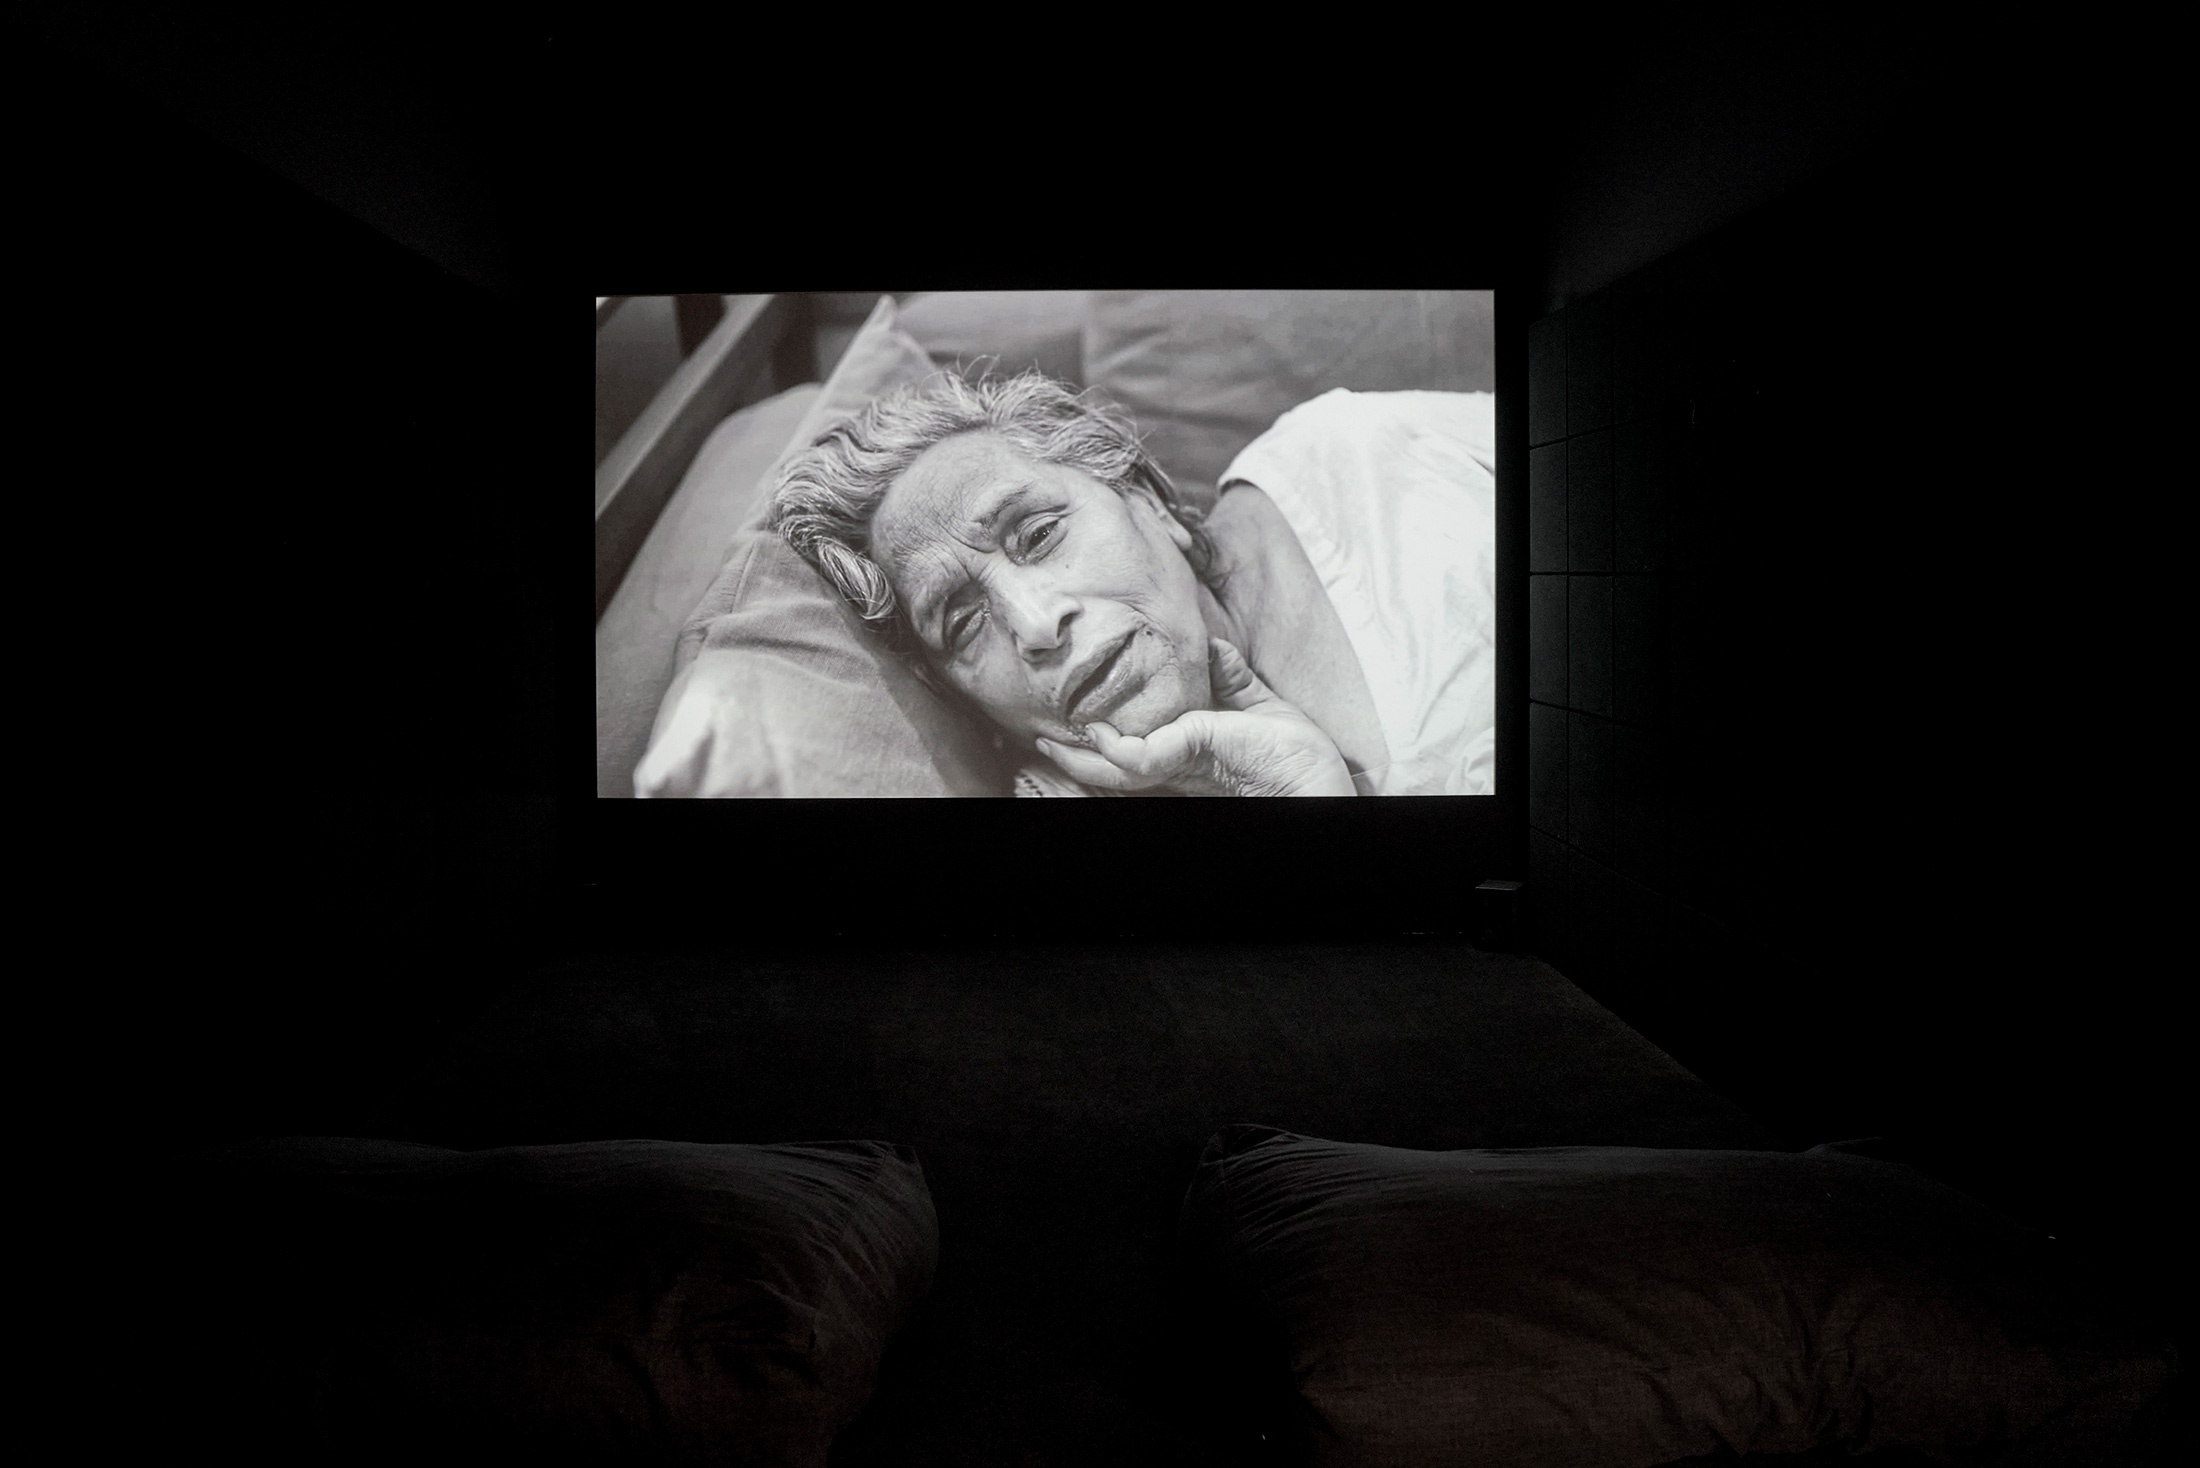 Installation photograph that shows Dayanita Singh’s video work ‘Mona and Myself’ projected onto a wall in a darkened room.
